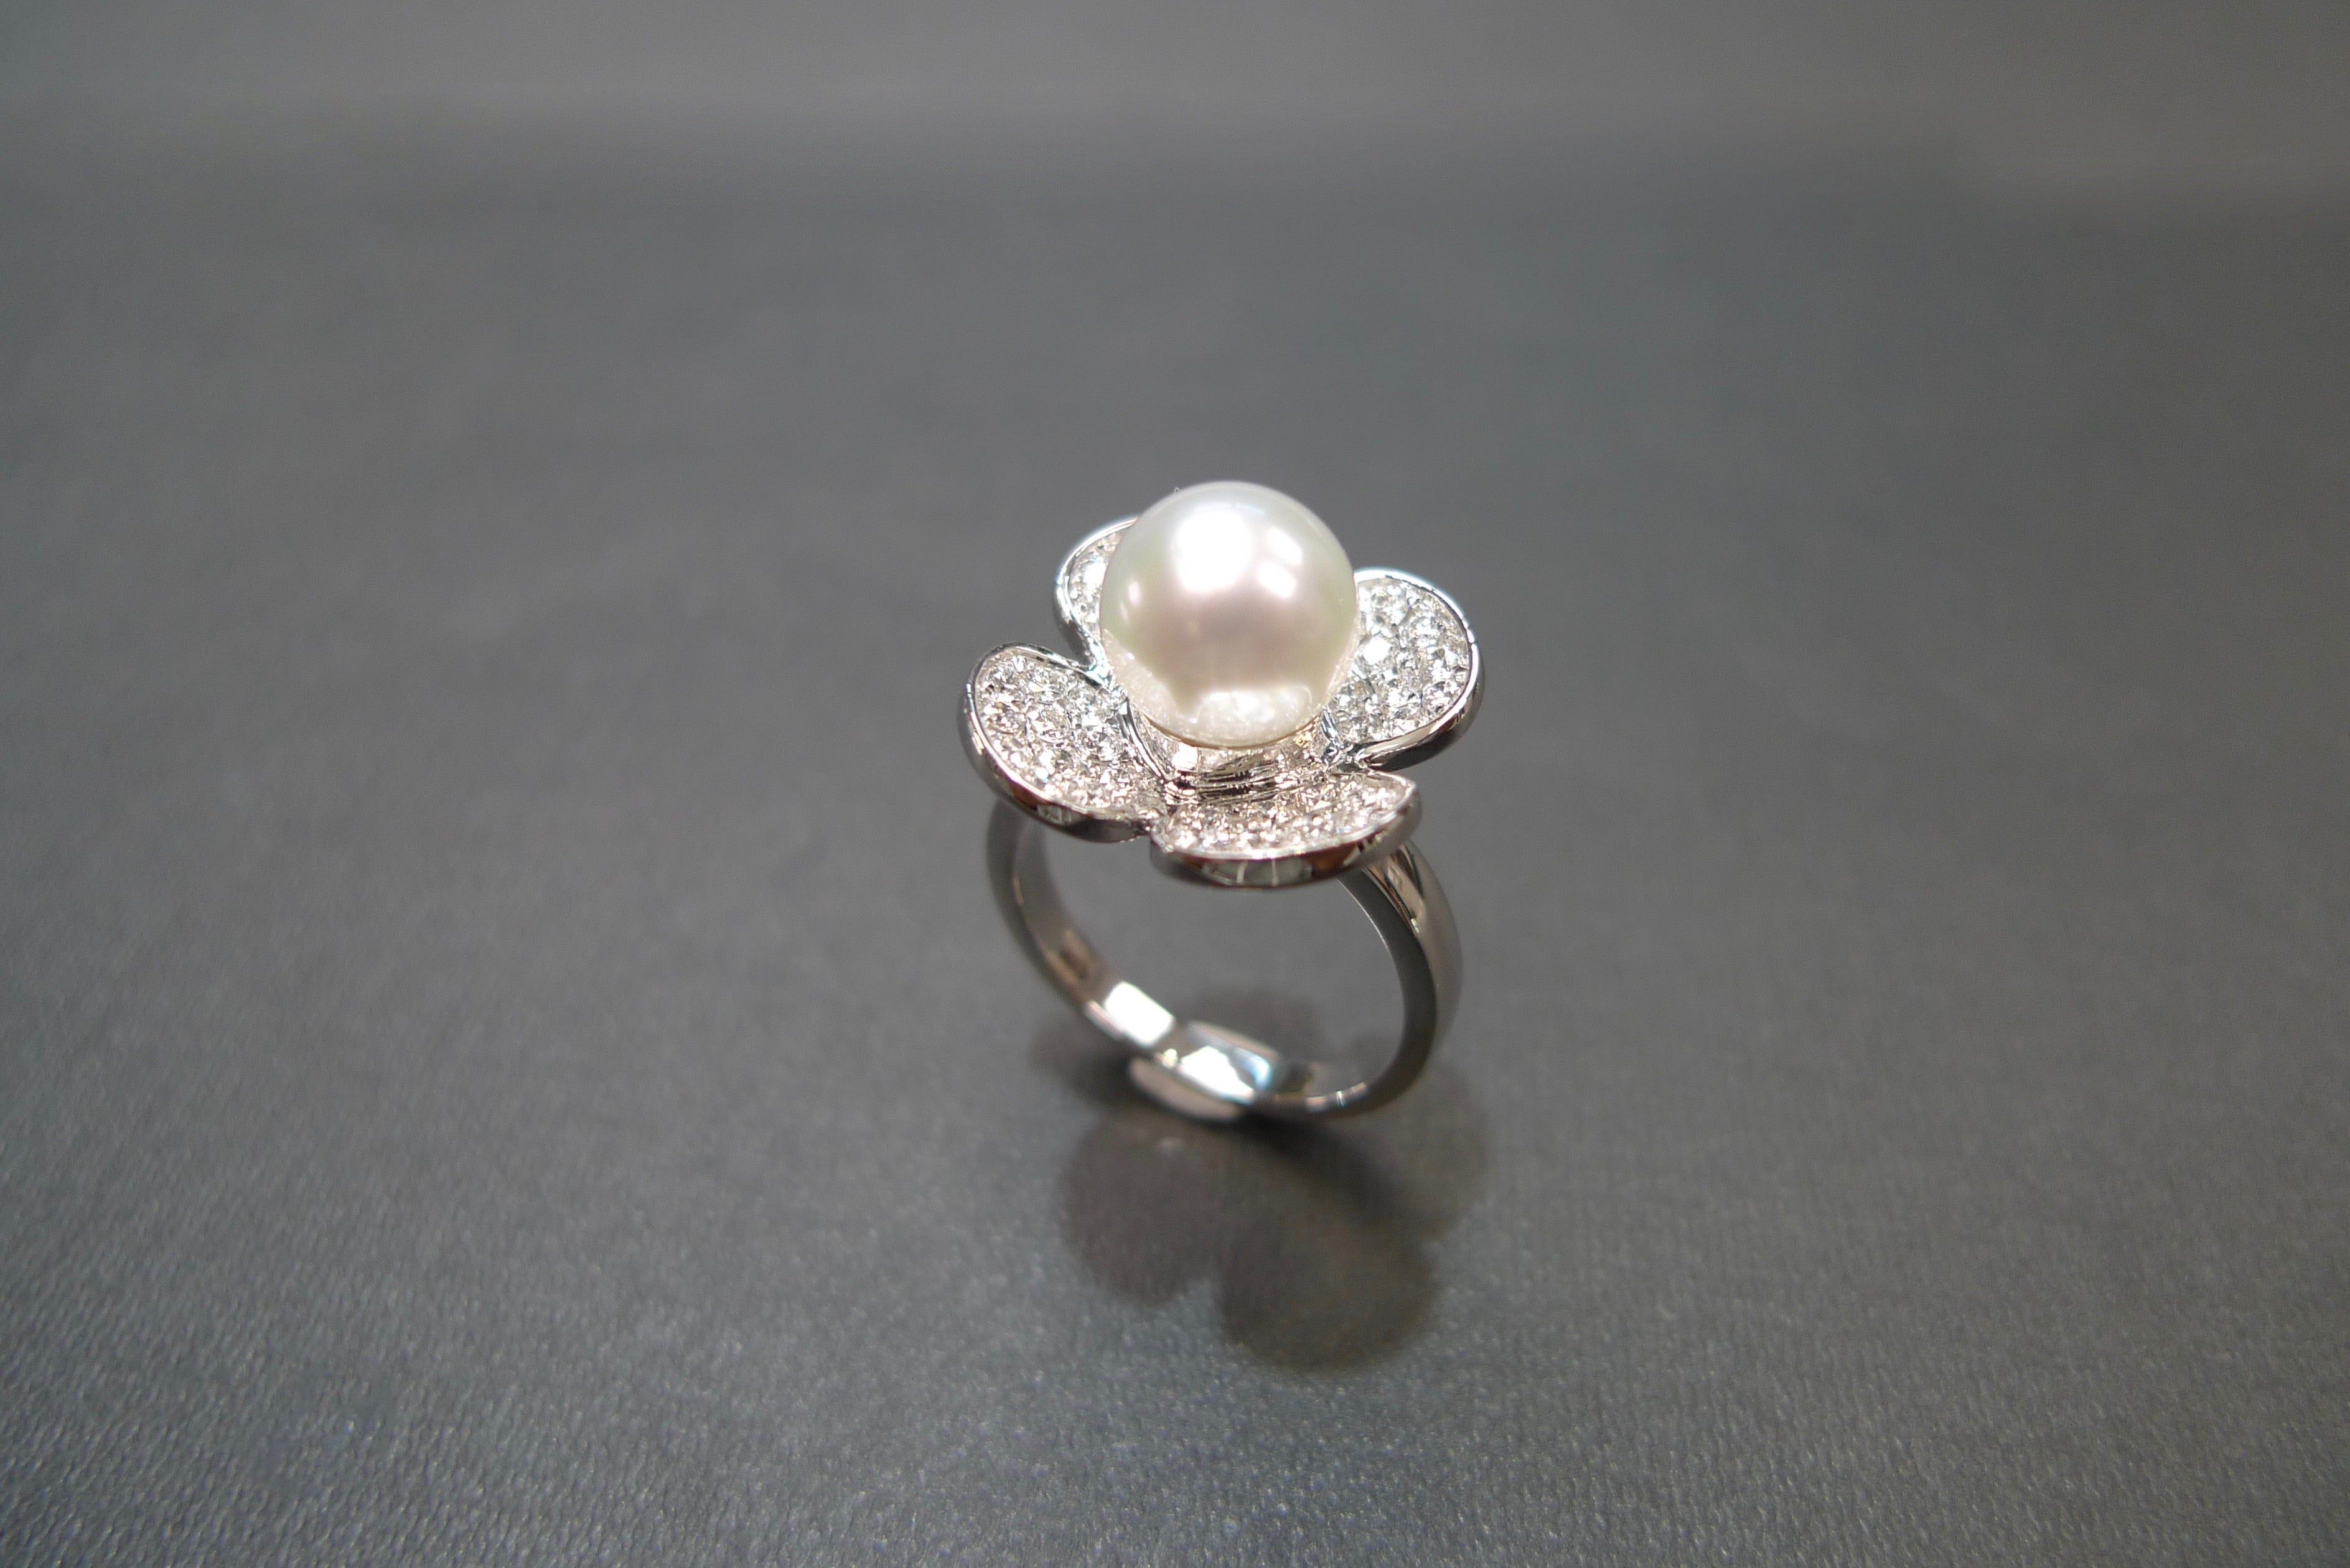 White Pearl & Diamond Floral Ring in 18K White Gold - HN JEWELRY